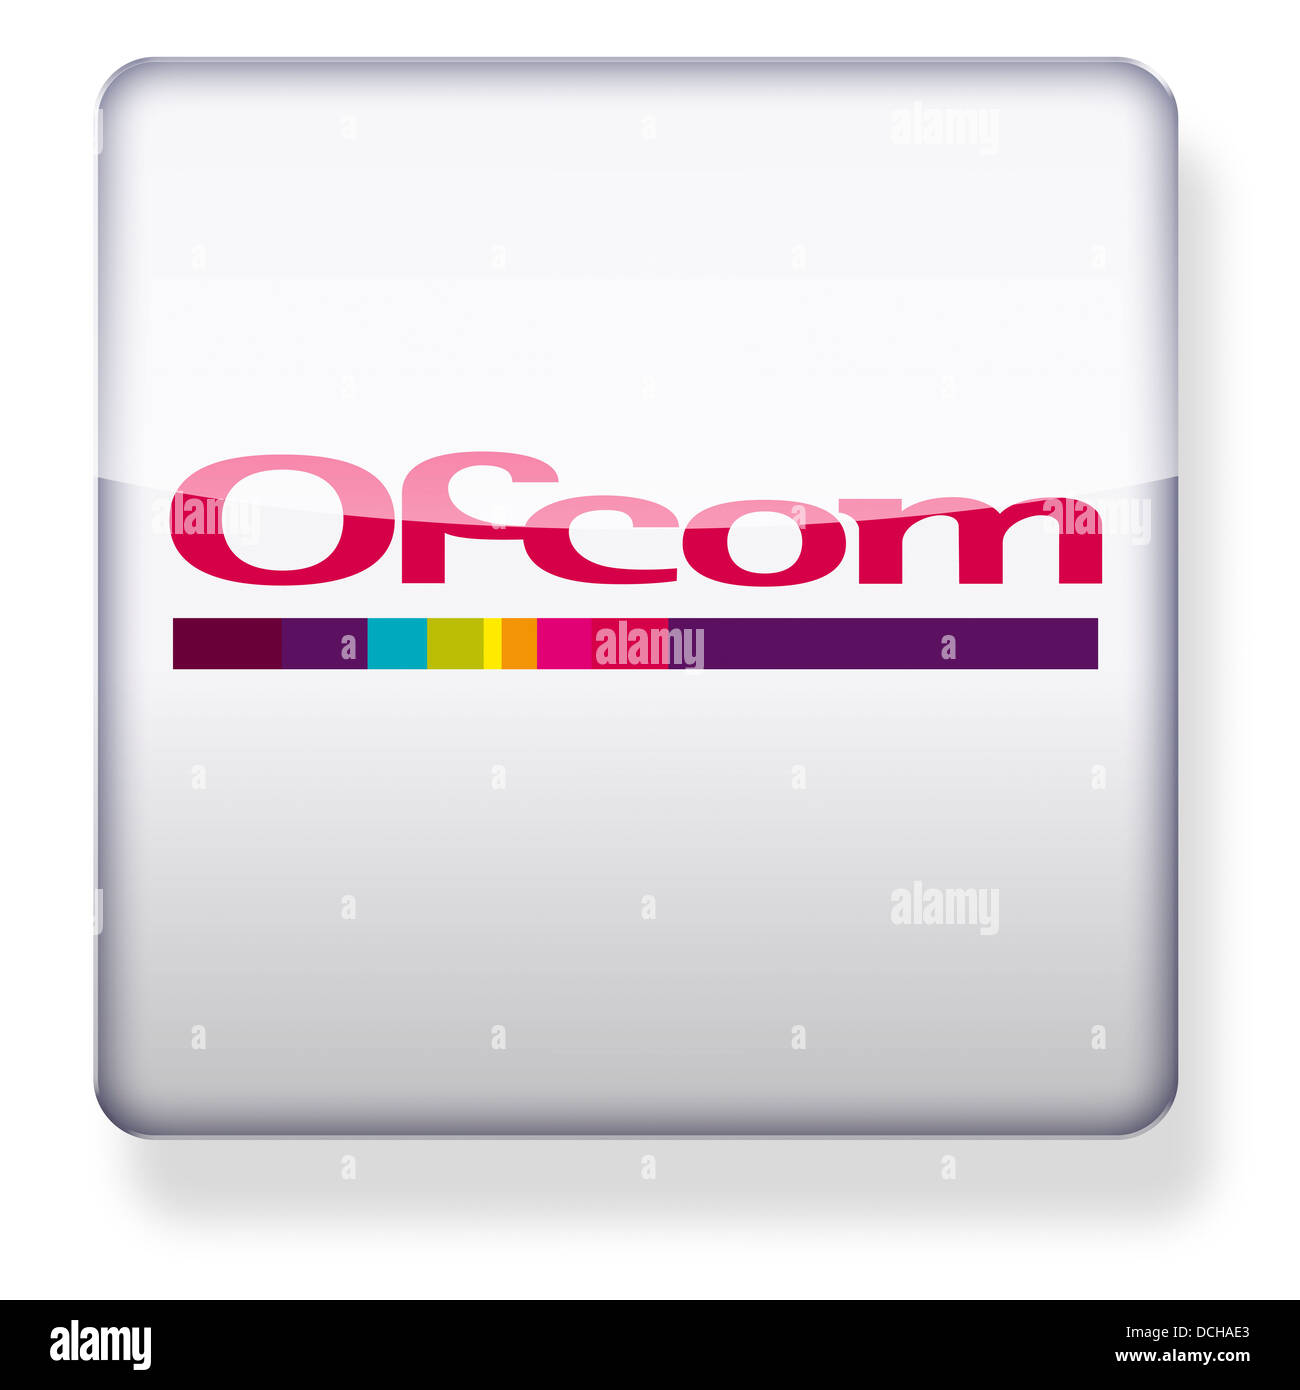 Ofcom logo as an app icon. Clipping path included. Stock Photo